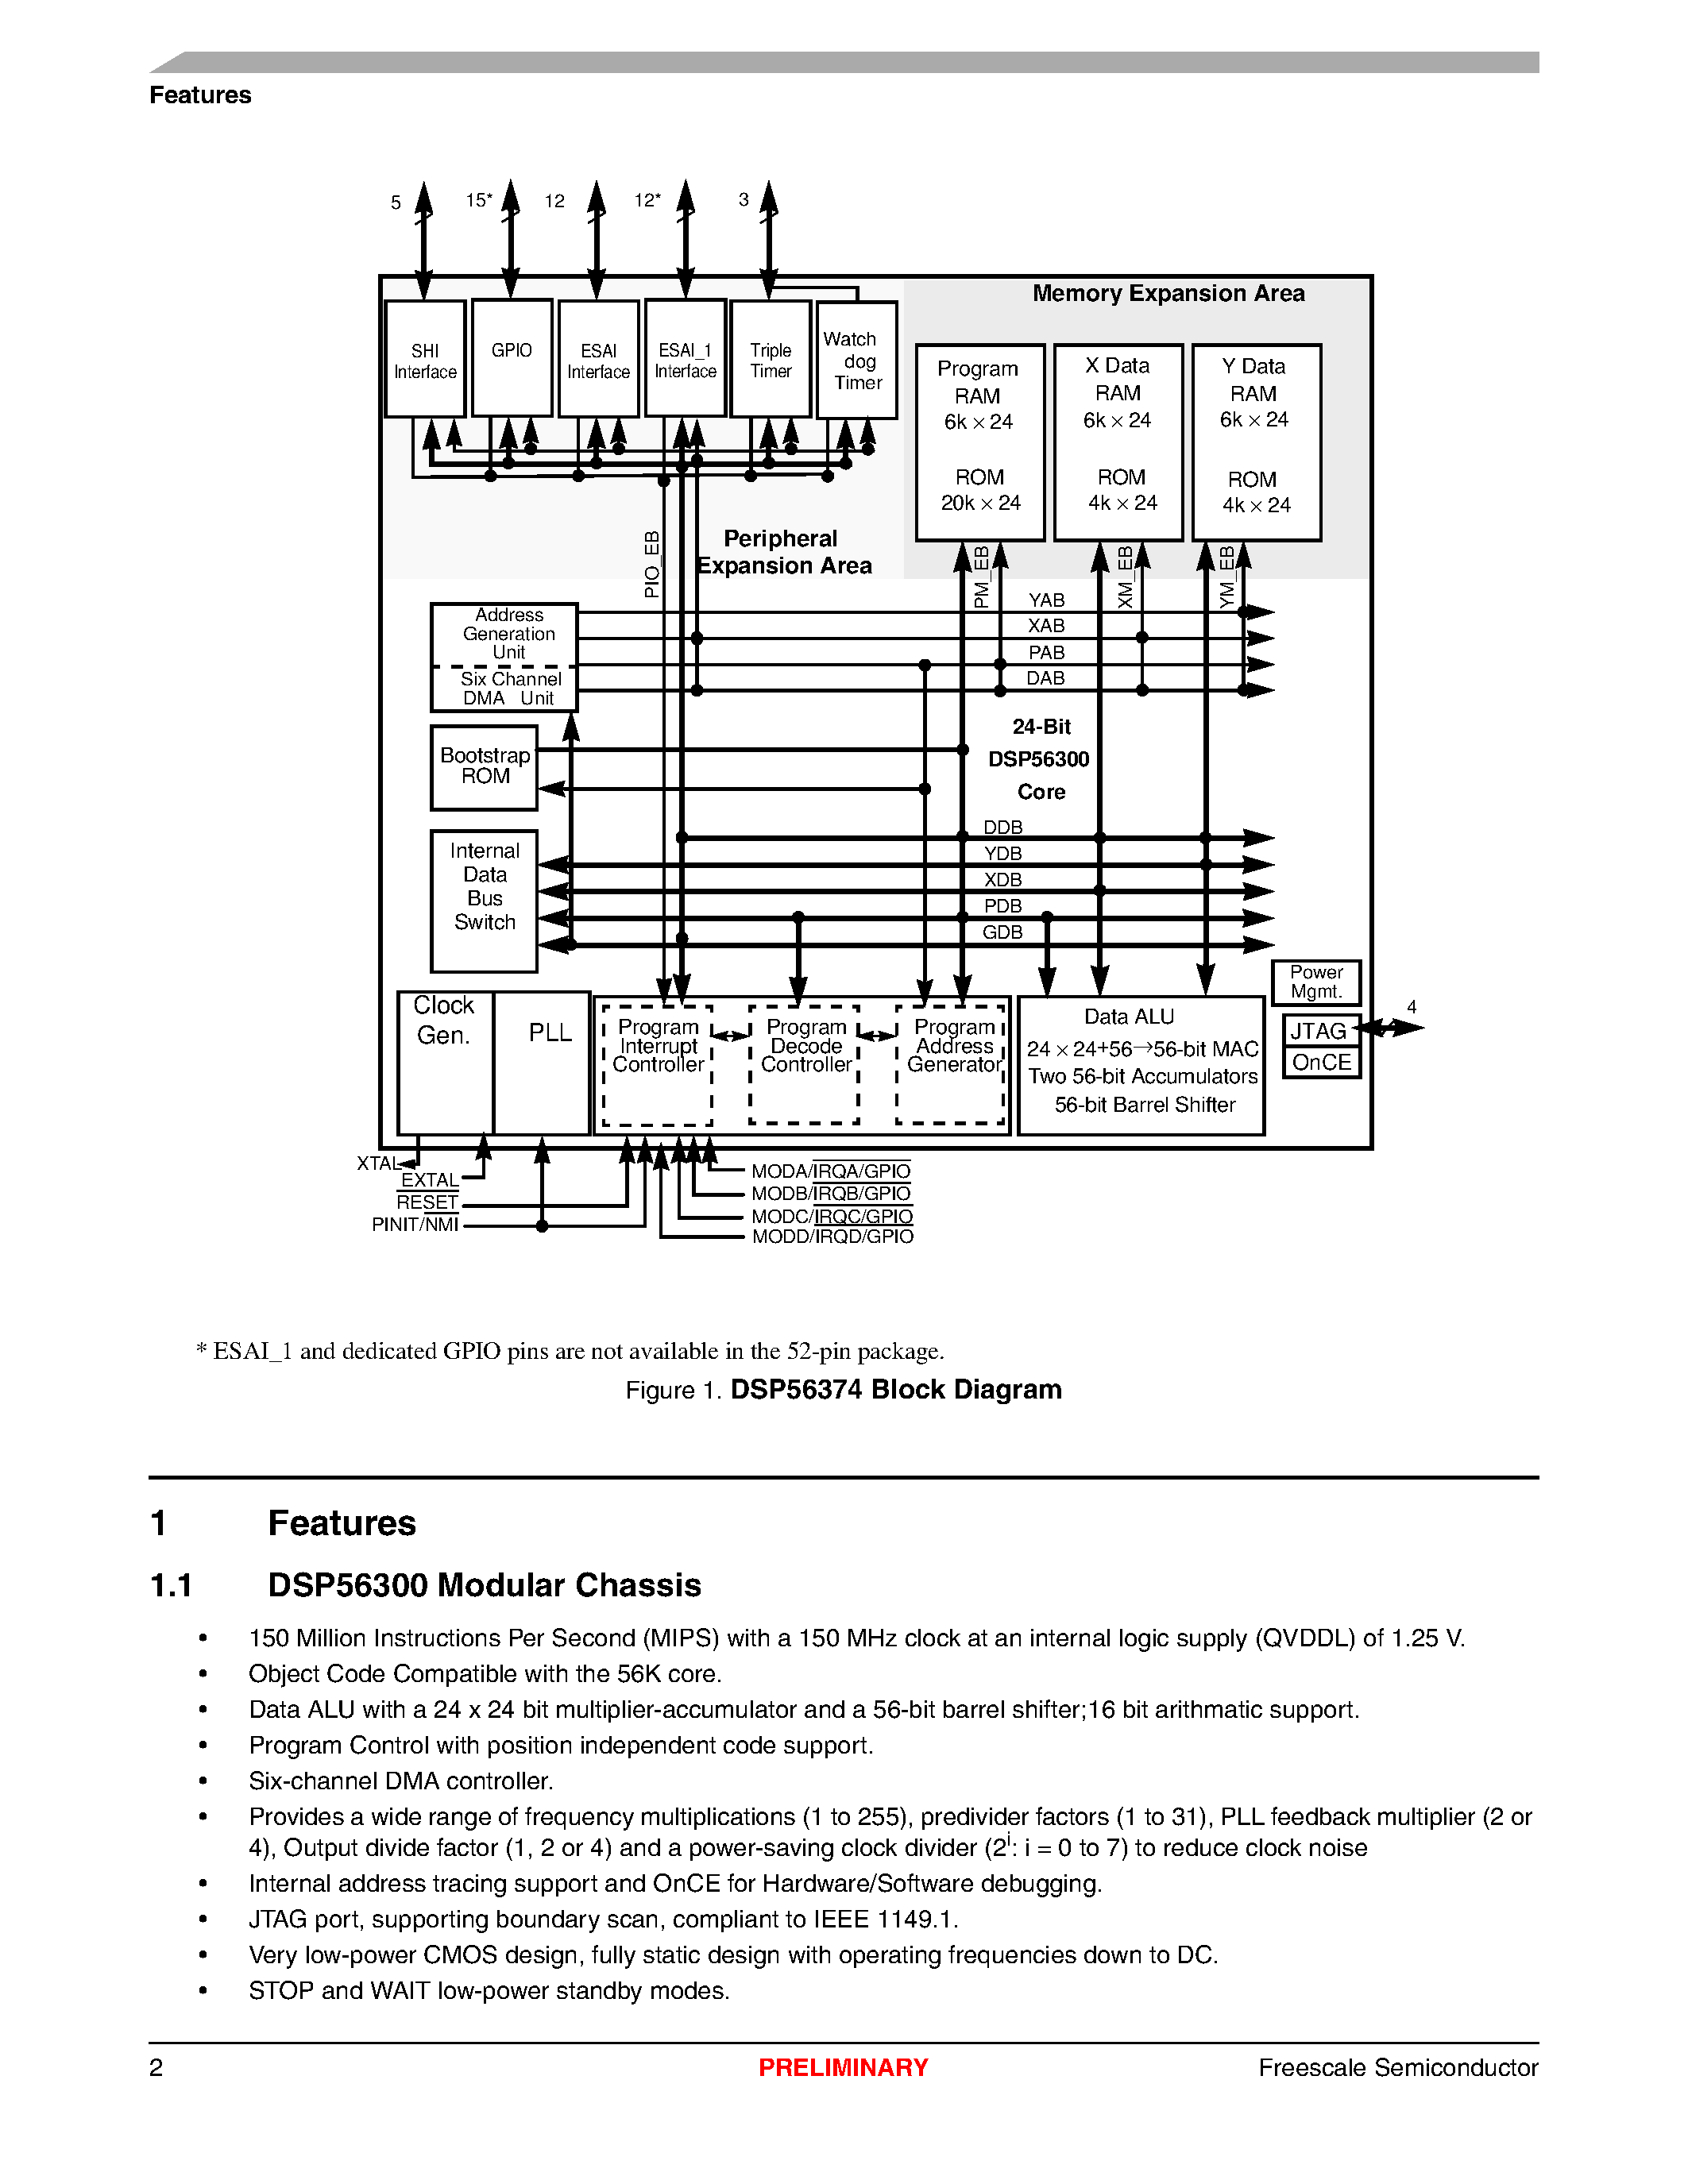 Datasheet DSP56374PB/D - high density CMOS device with 3.3 V inputs and outputs page 2